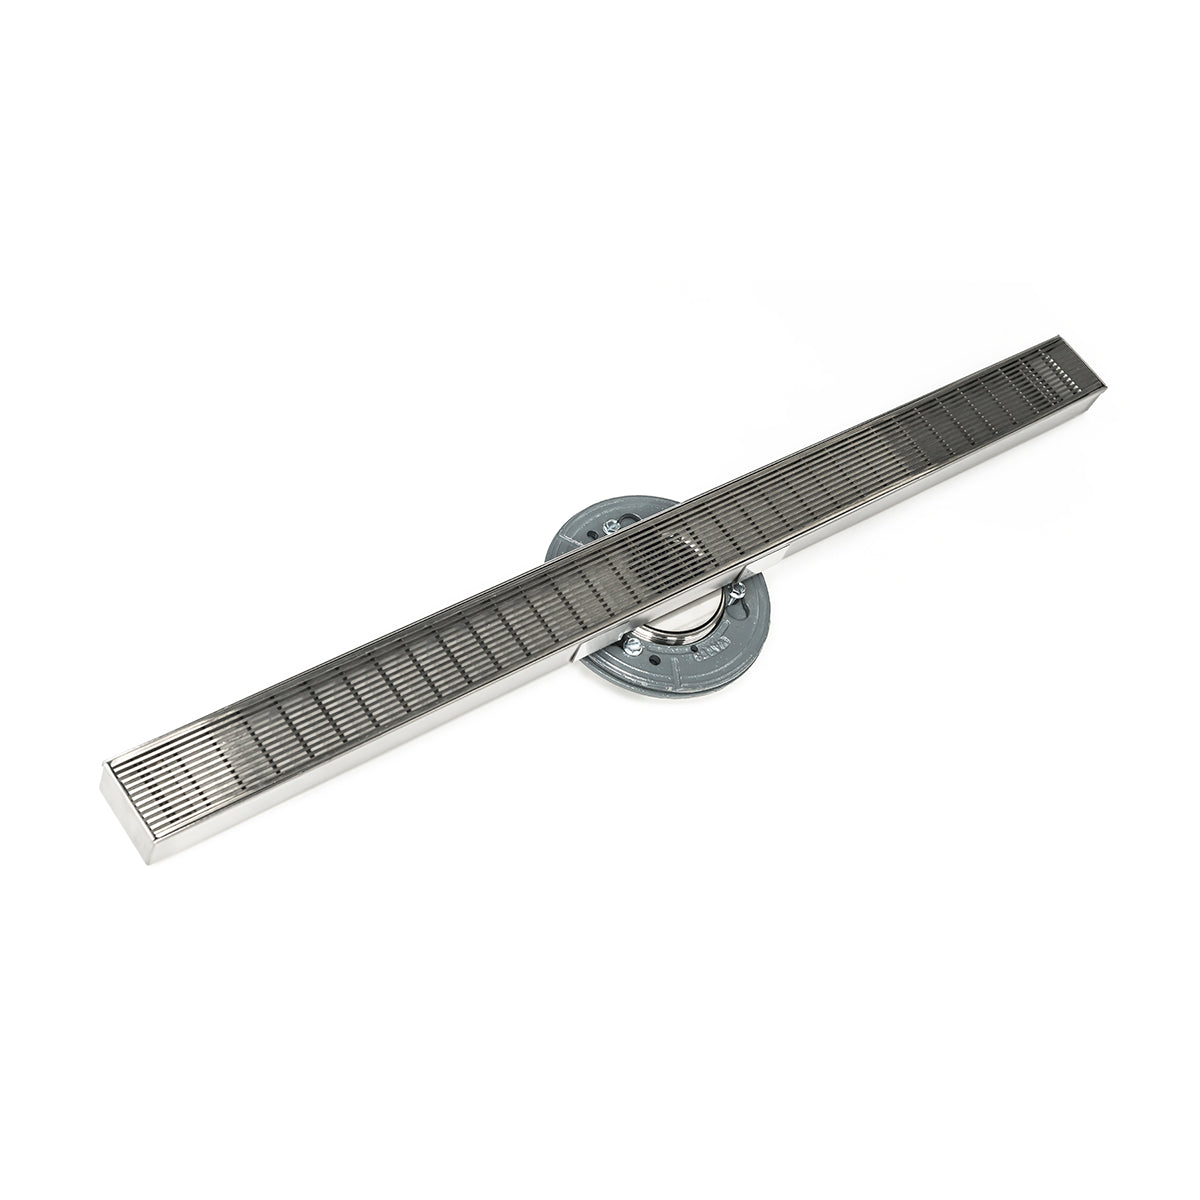 Infinity Drain 96" S-Stainless Steel Series High Flow Site Sizable Linear Drain Kit with 2 1/2" Wedge Wire Grate with PVC Drain Body, 3" Outlet